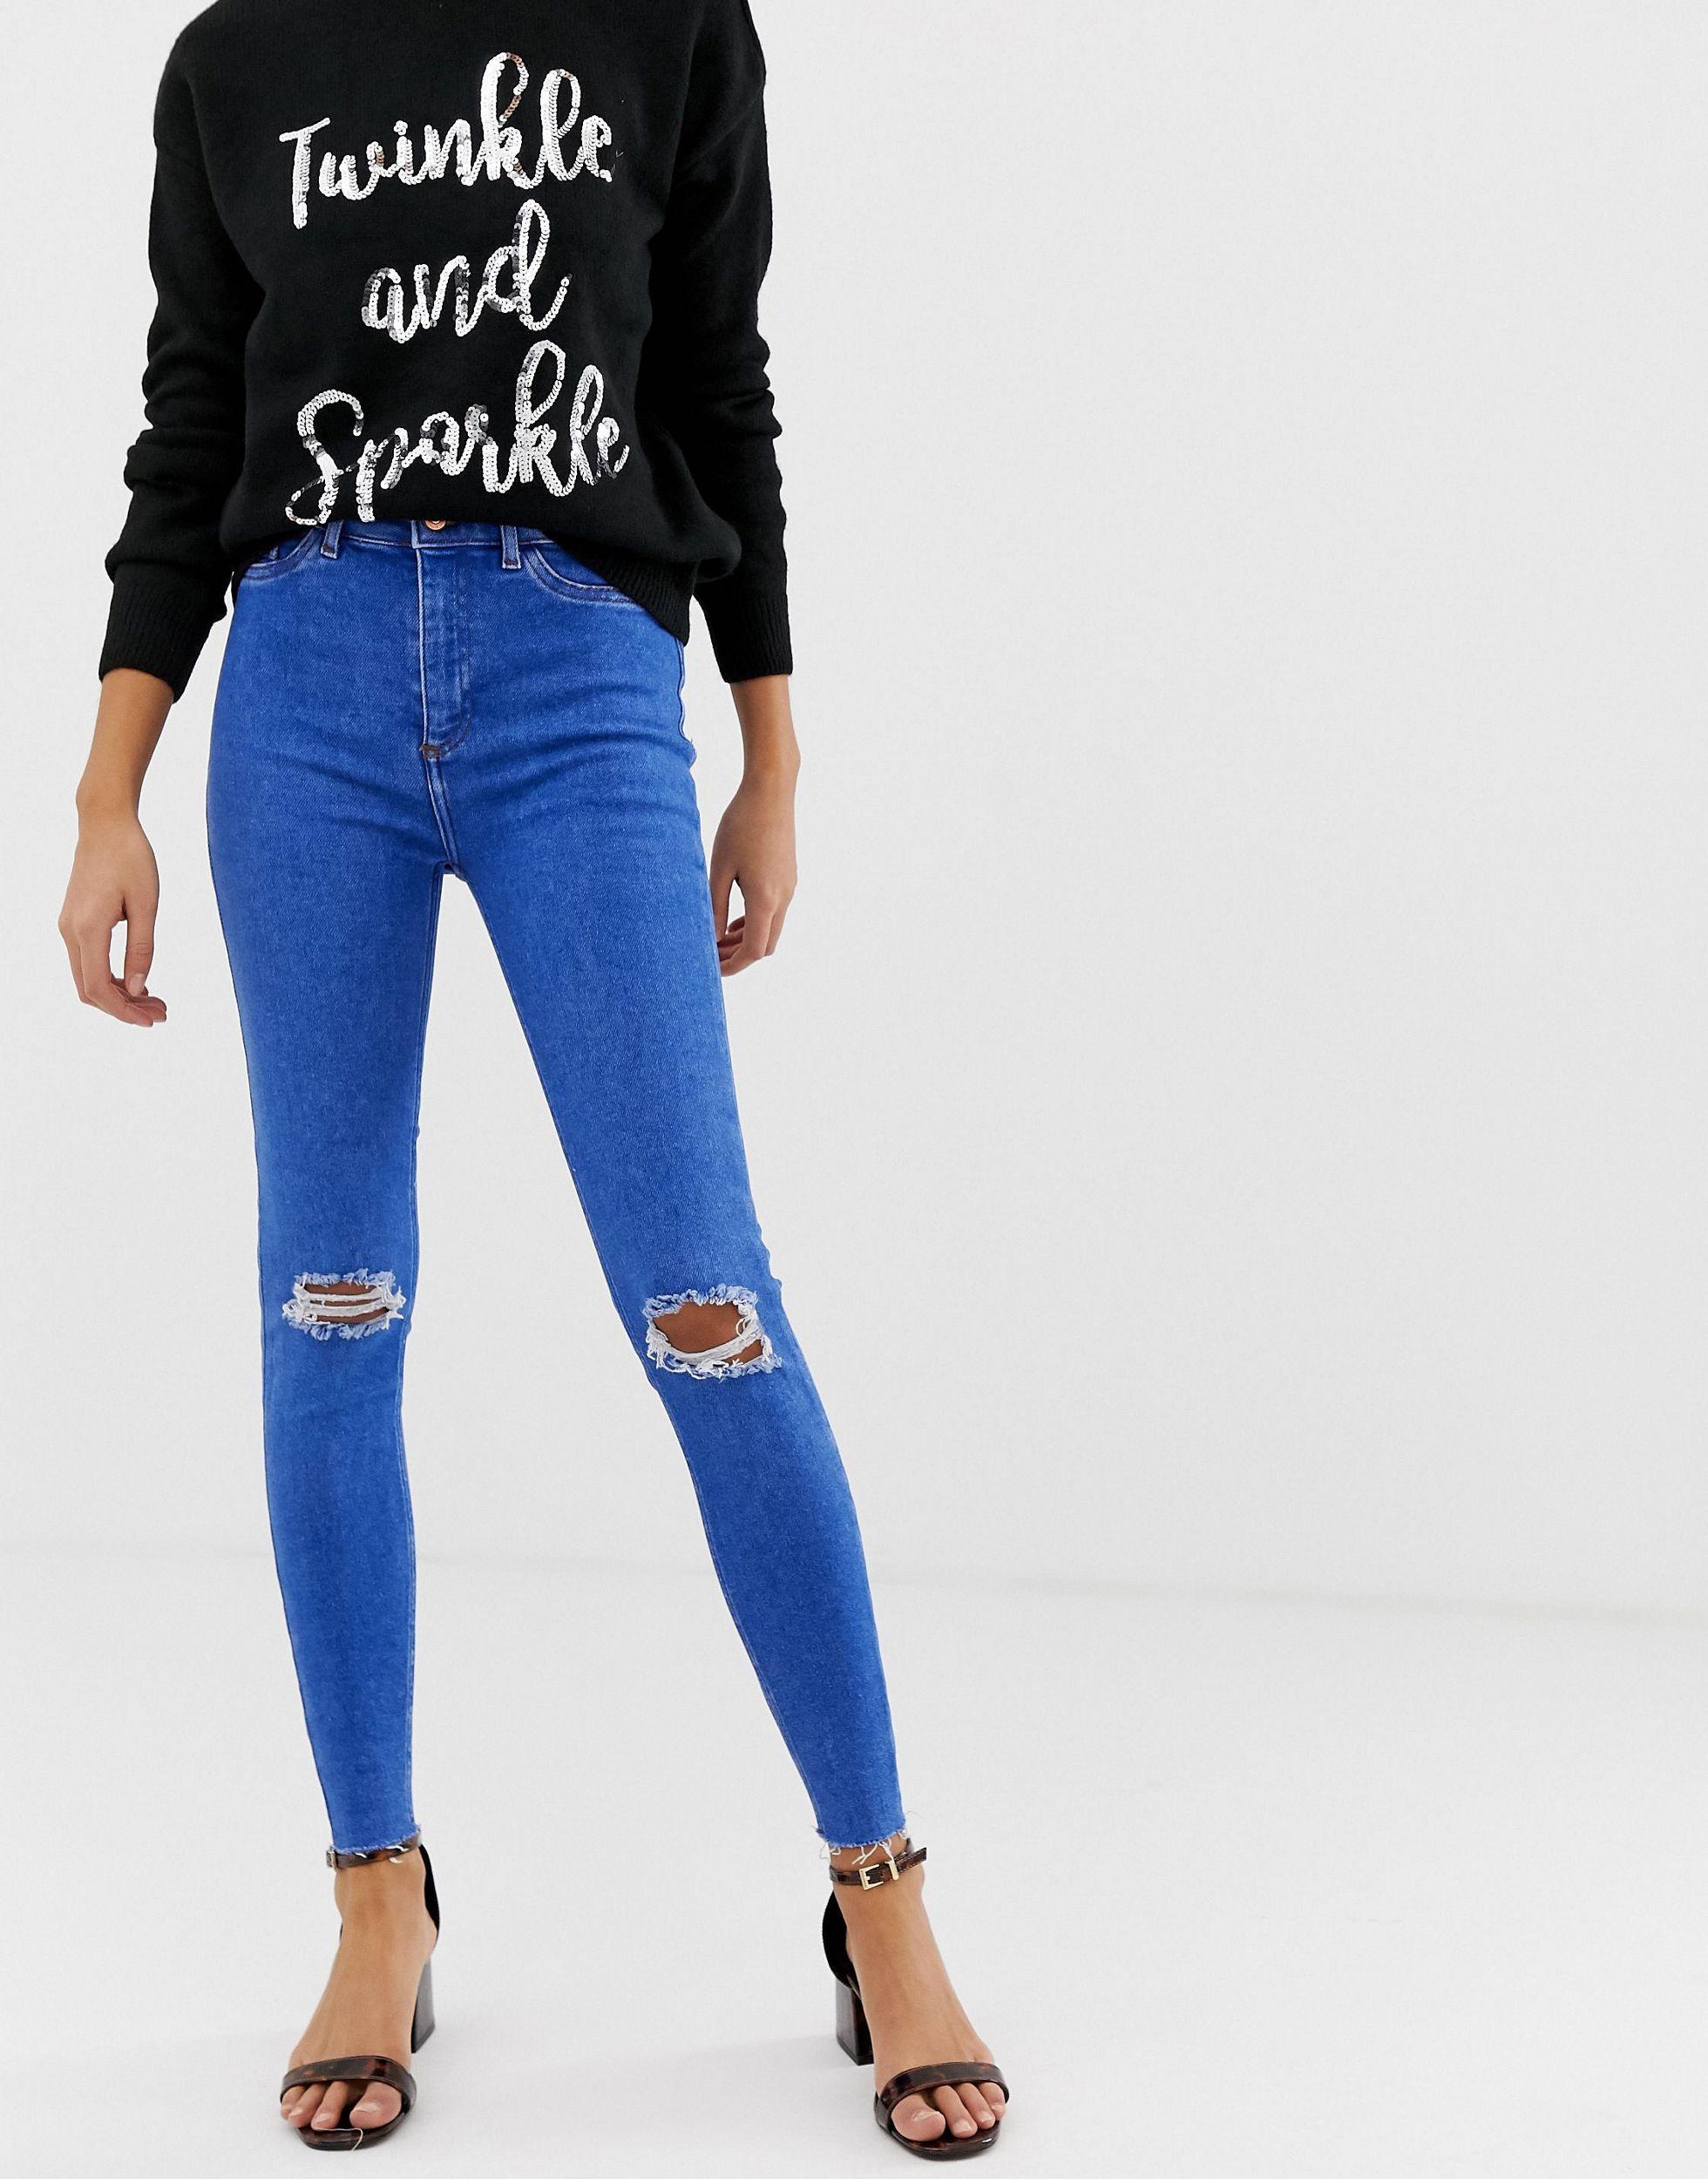 New Look Hallie Disco High Rise Ripped Jeans in Blue | Lyst UK